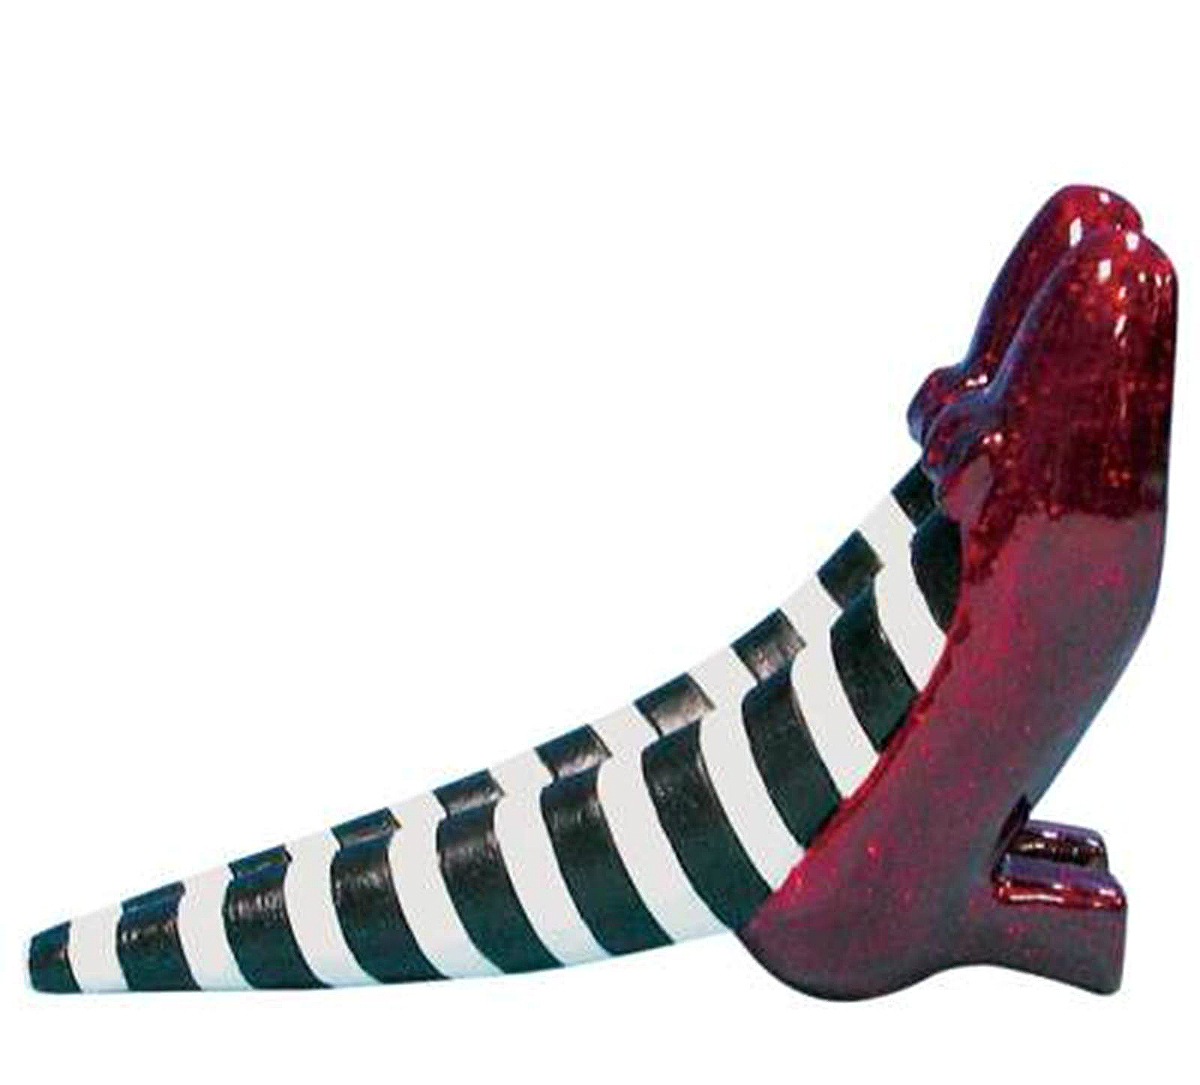 The Wizard of Oz Red Ruby Slippers Doorstop - Wicked Witch of the East